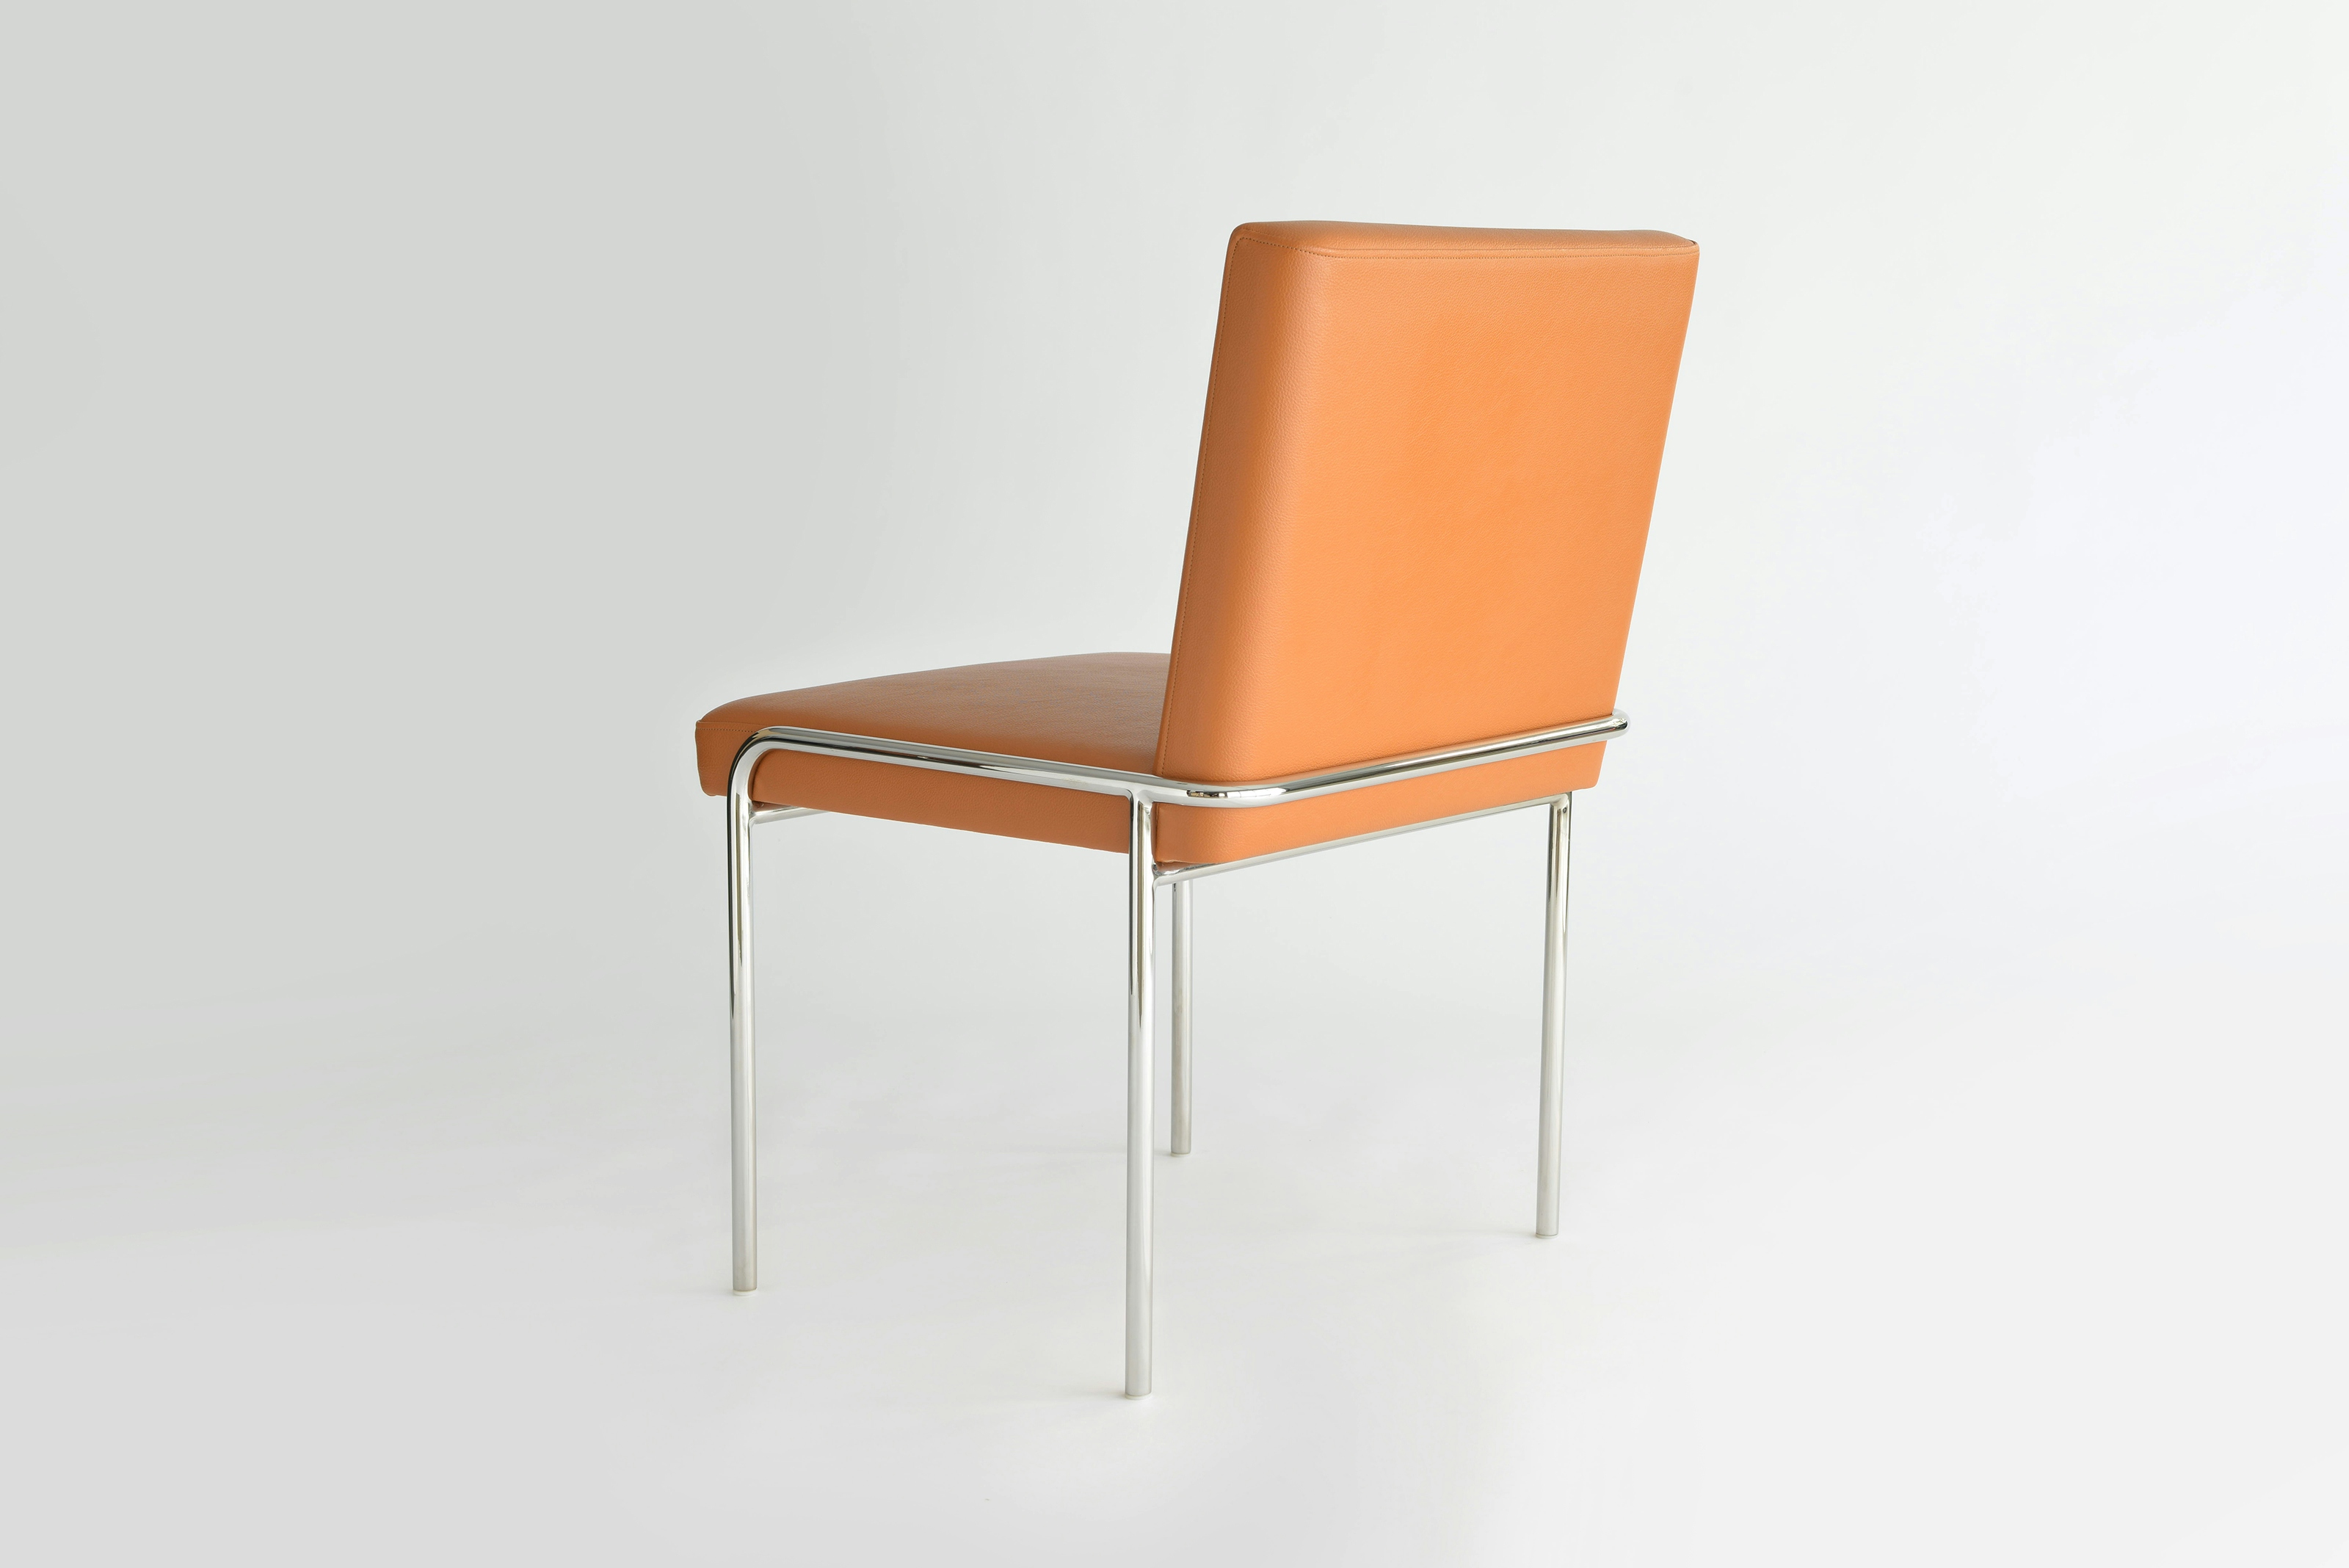 Phase Design Trolley Side Chair without arm 3 Web